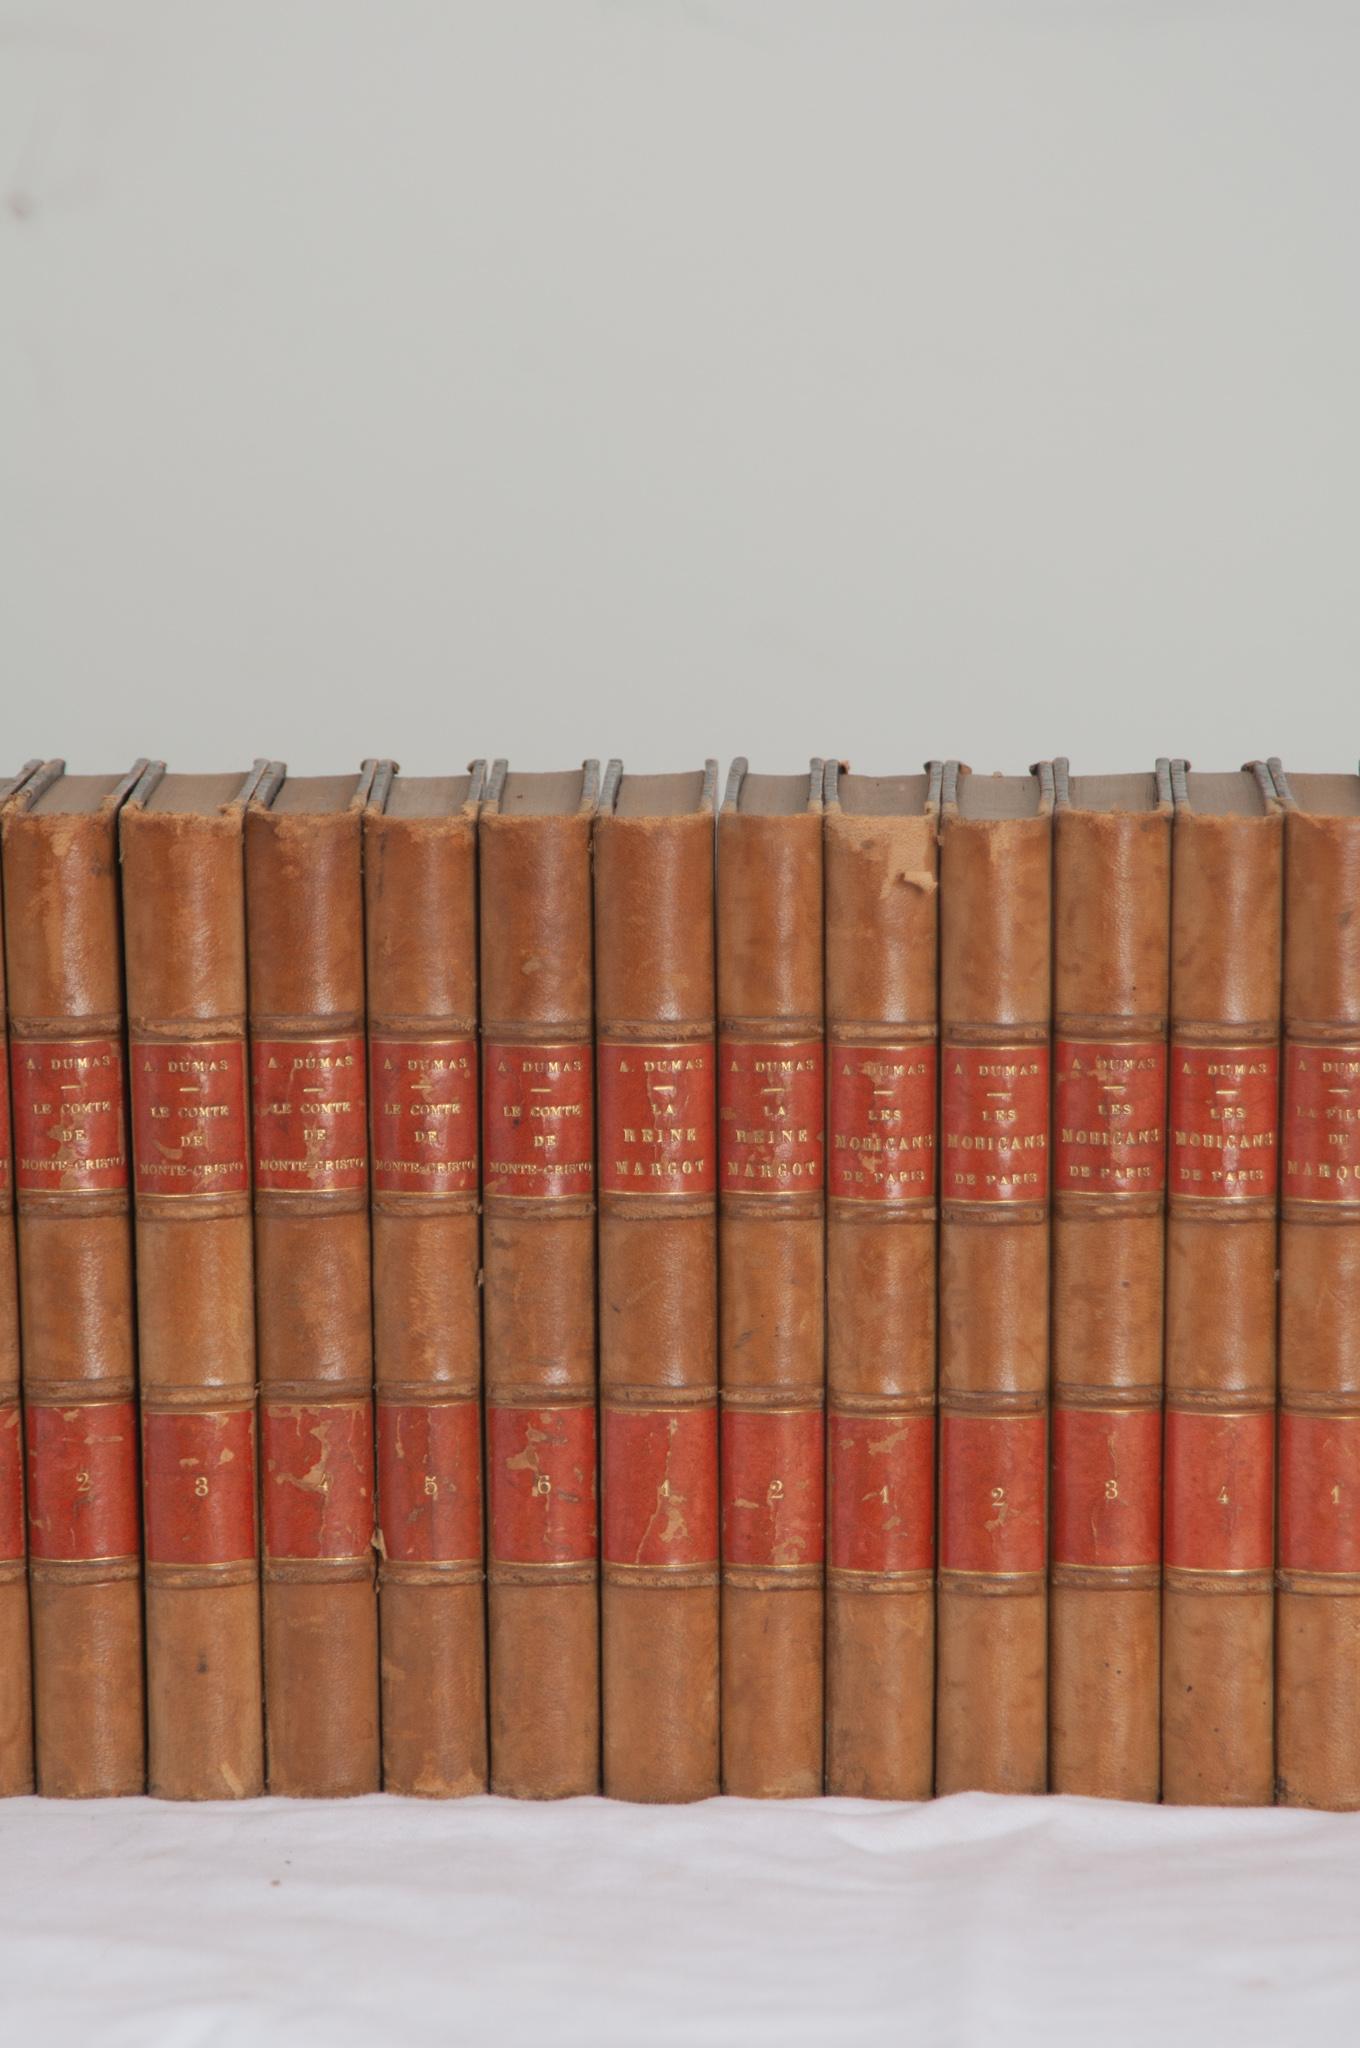 Hand-Crafted Set of 25 Books by French Author Alexandre Dumas